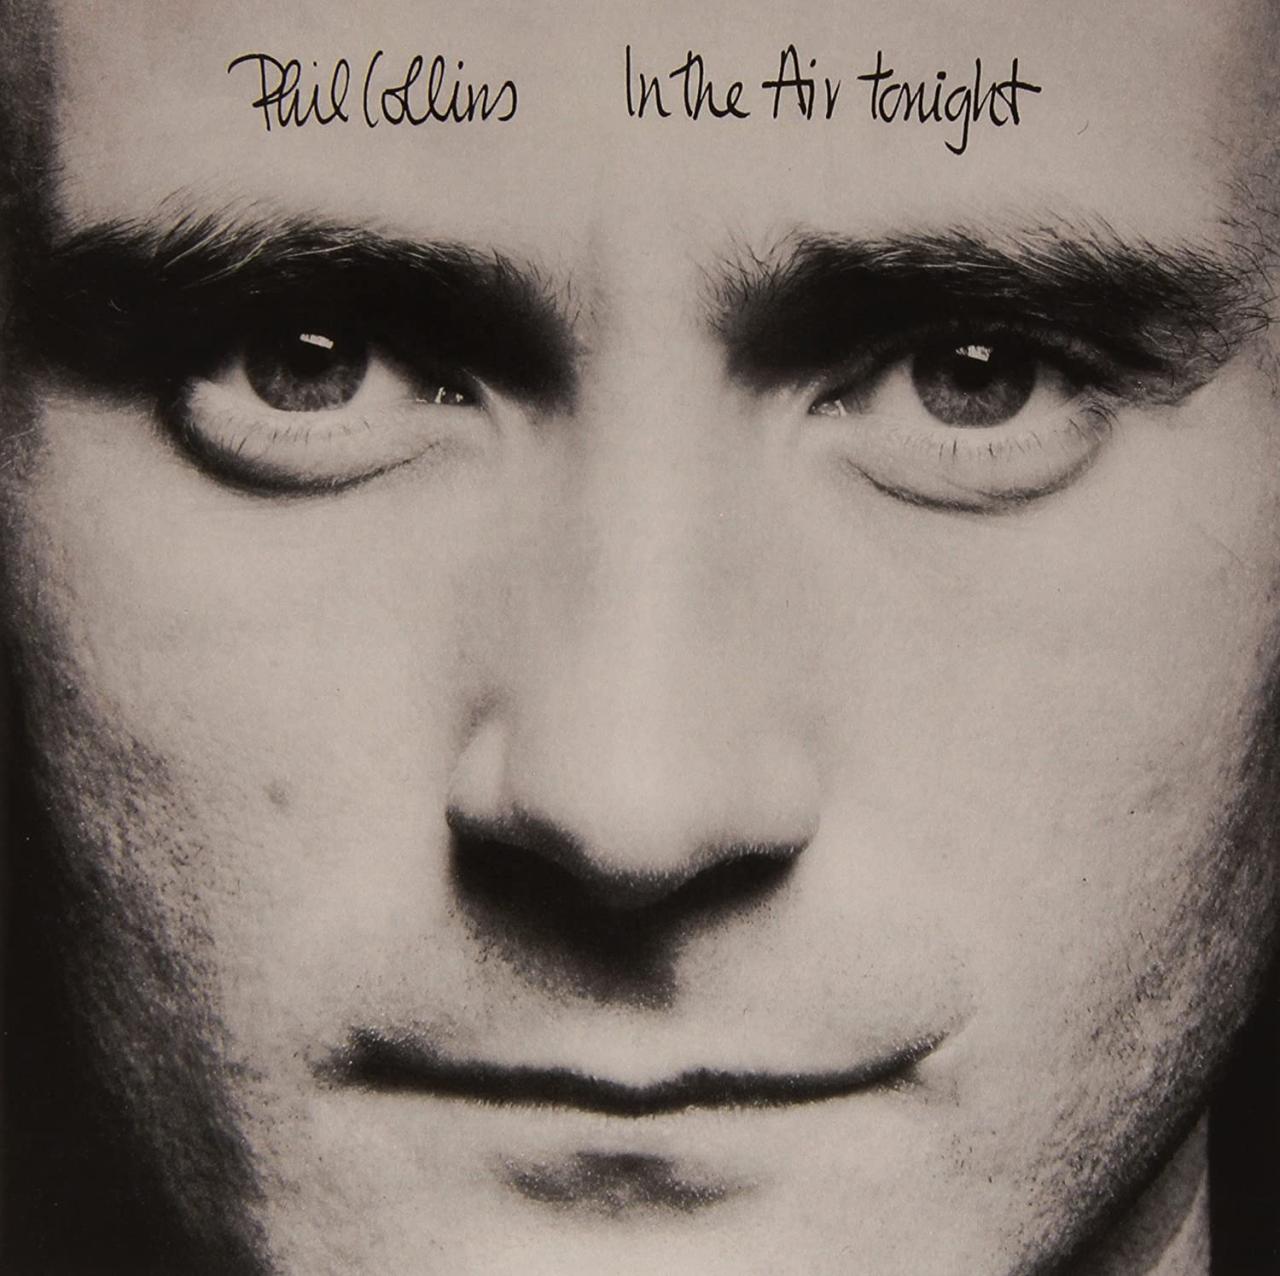 Phil Collins - In The Air Tonight mp3 download